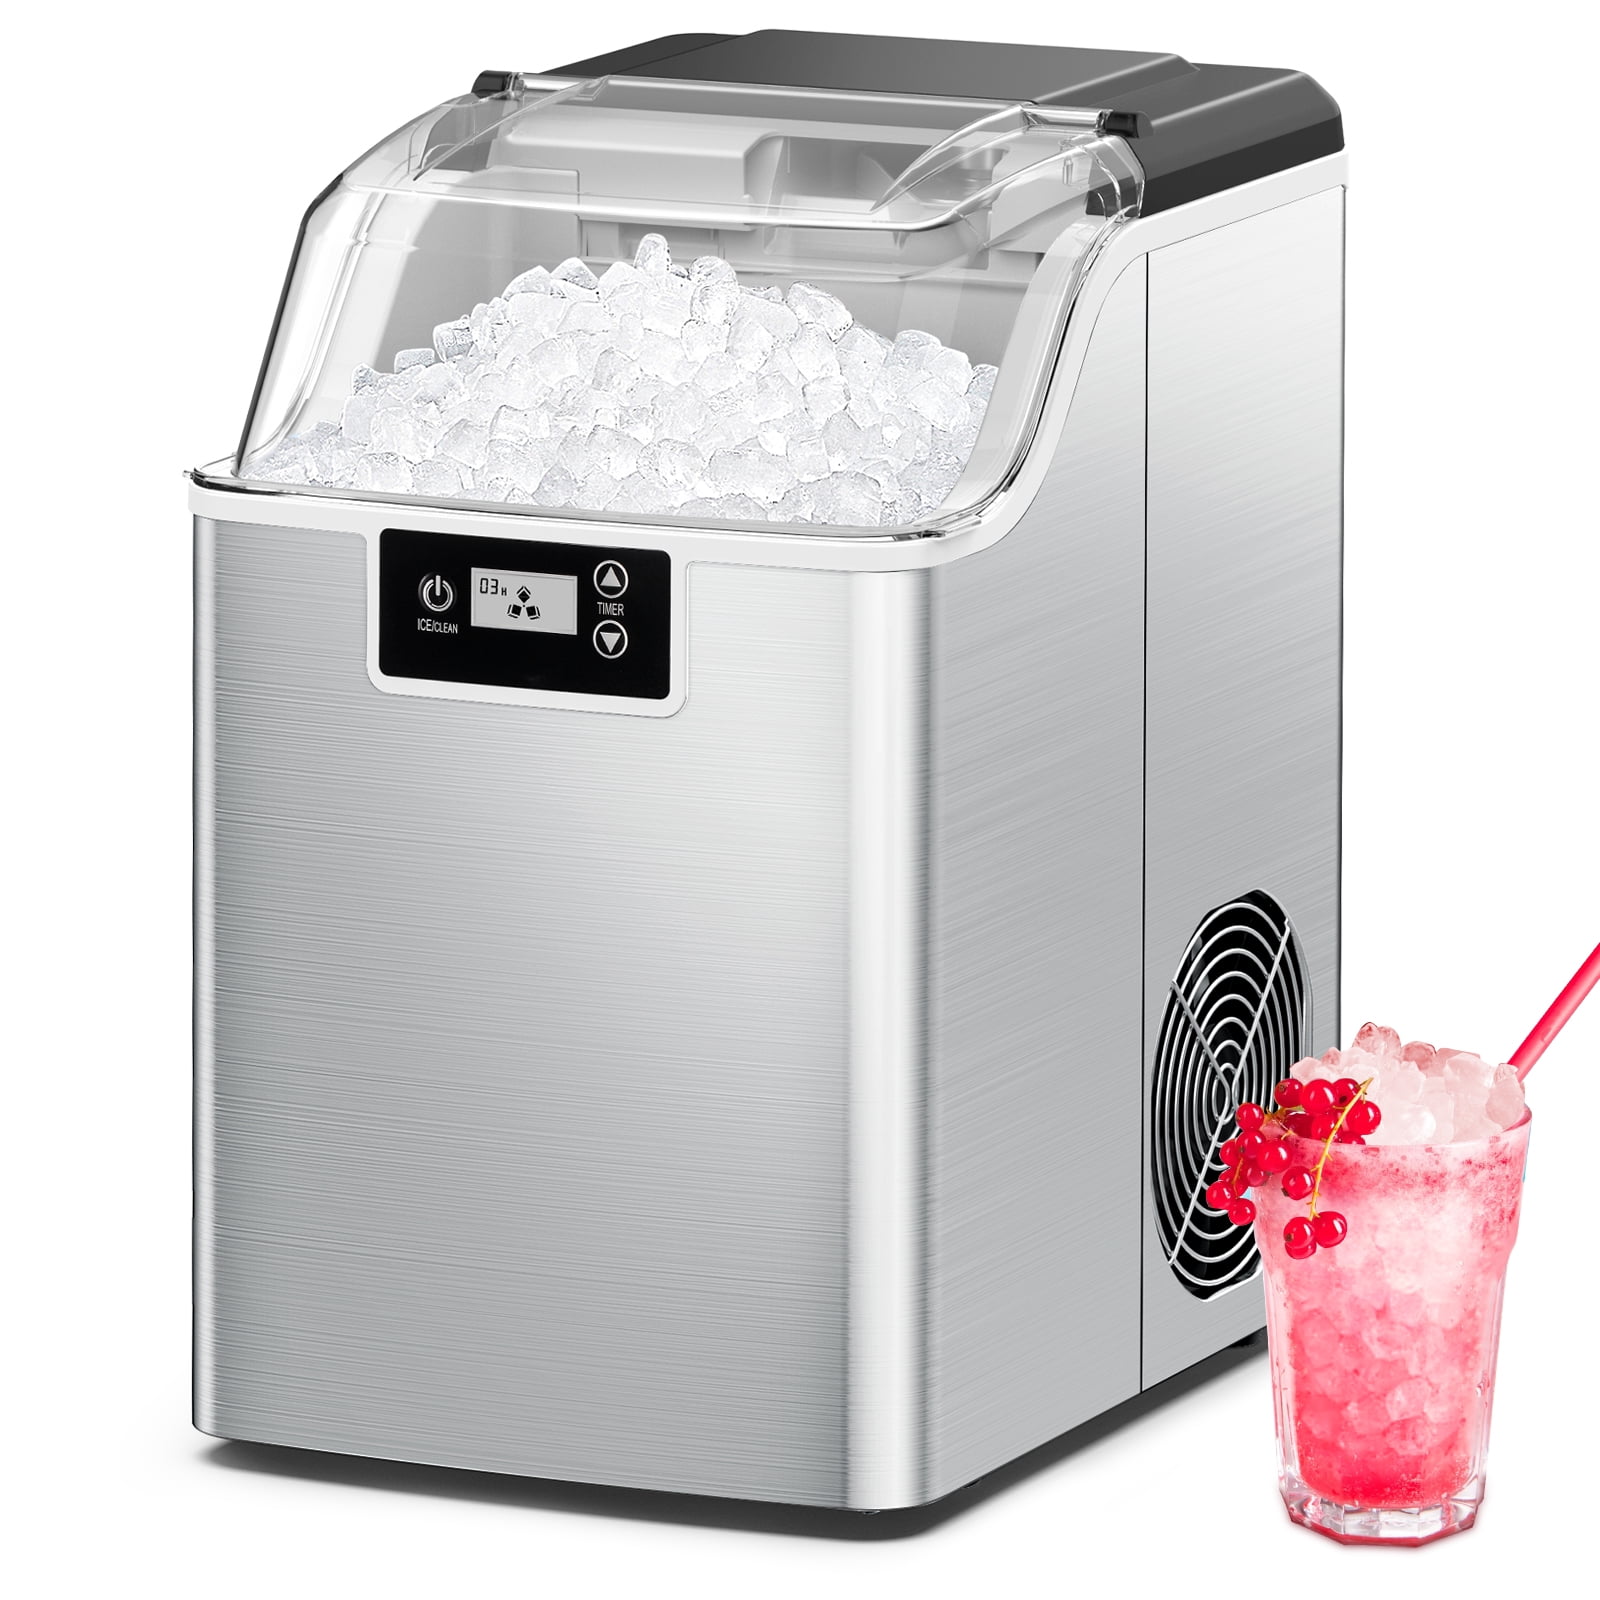 HECMAC Nugget Ice Maker Countertop, 44 lbs/Day, Chewable Ice Maker, Rapid  Ice Release in 10 Mins, Self-Cleaning, Stainless Steel - AliExpress